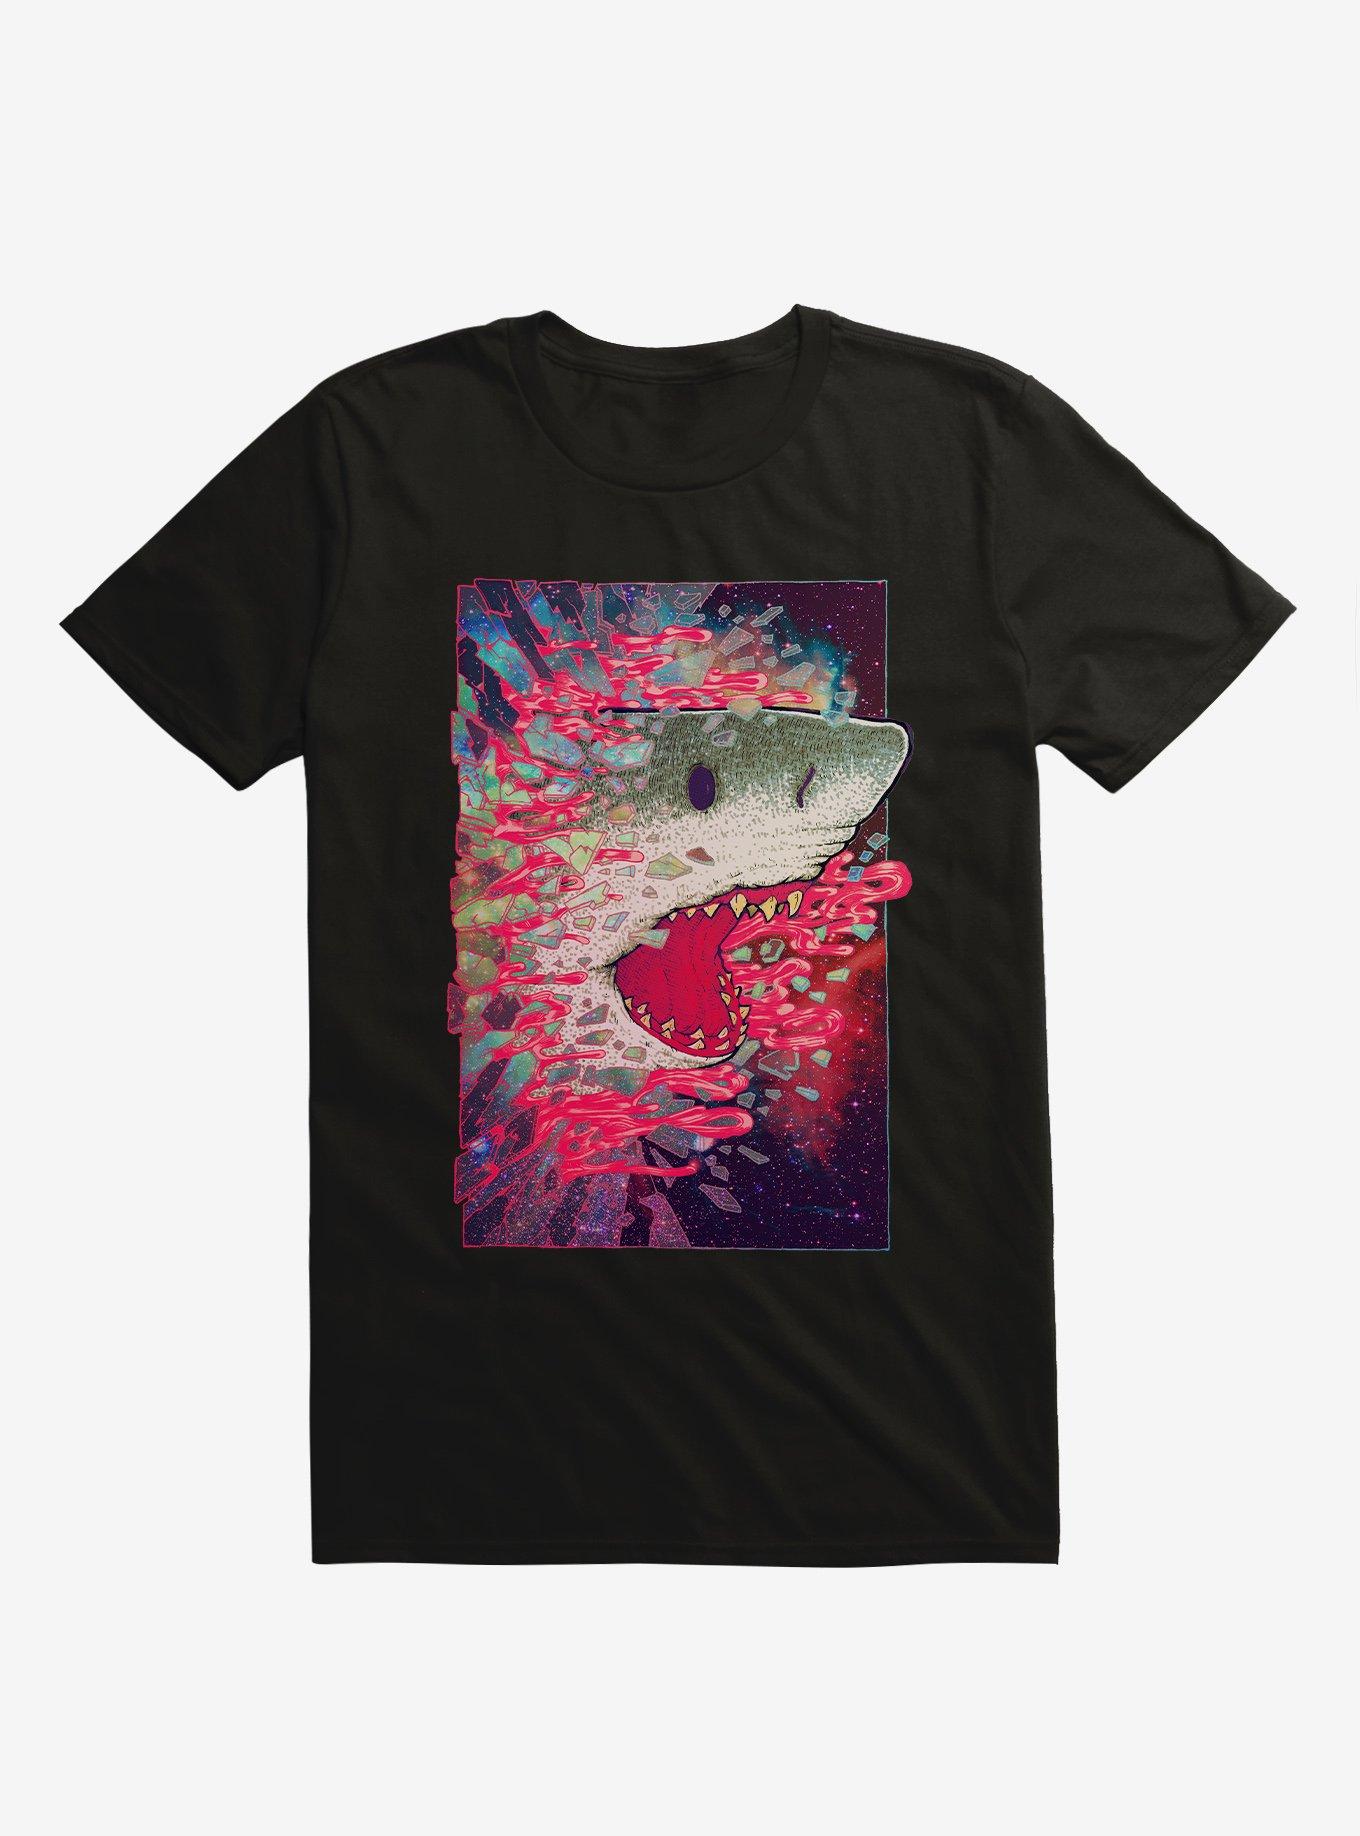 Shark From Outer Space Galaxy Black T-Shirt, BLACK, hi-res